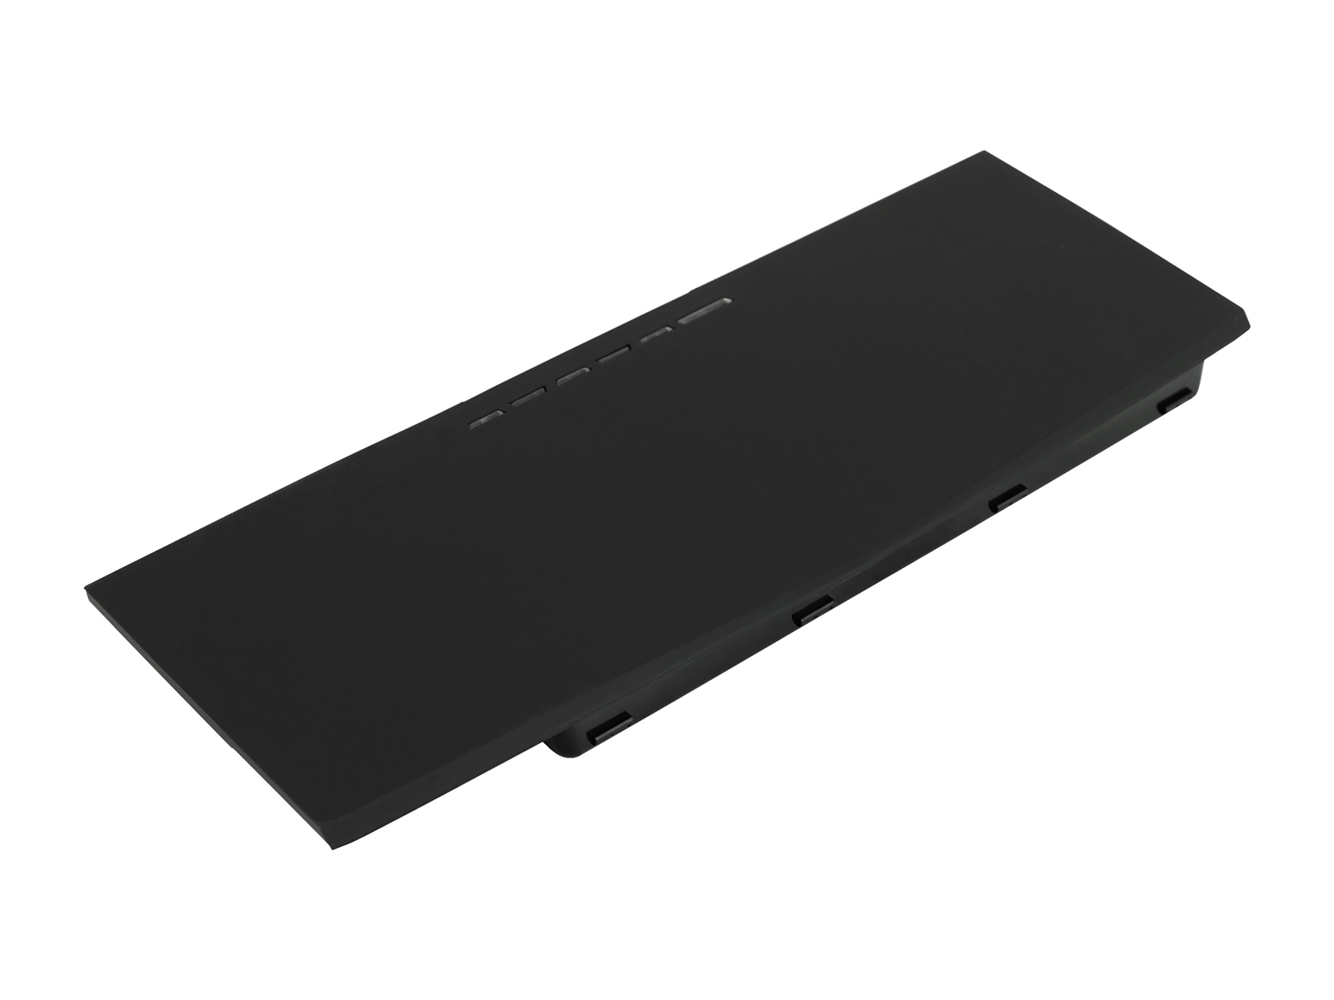 05WP5W, 07XC9N replacement Laptop Battery for Dell Alienware M17x R3 Series, Alienware M17x R4 Series, 7800mAh, 11.10V